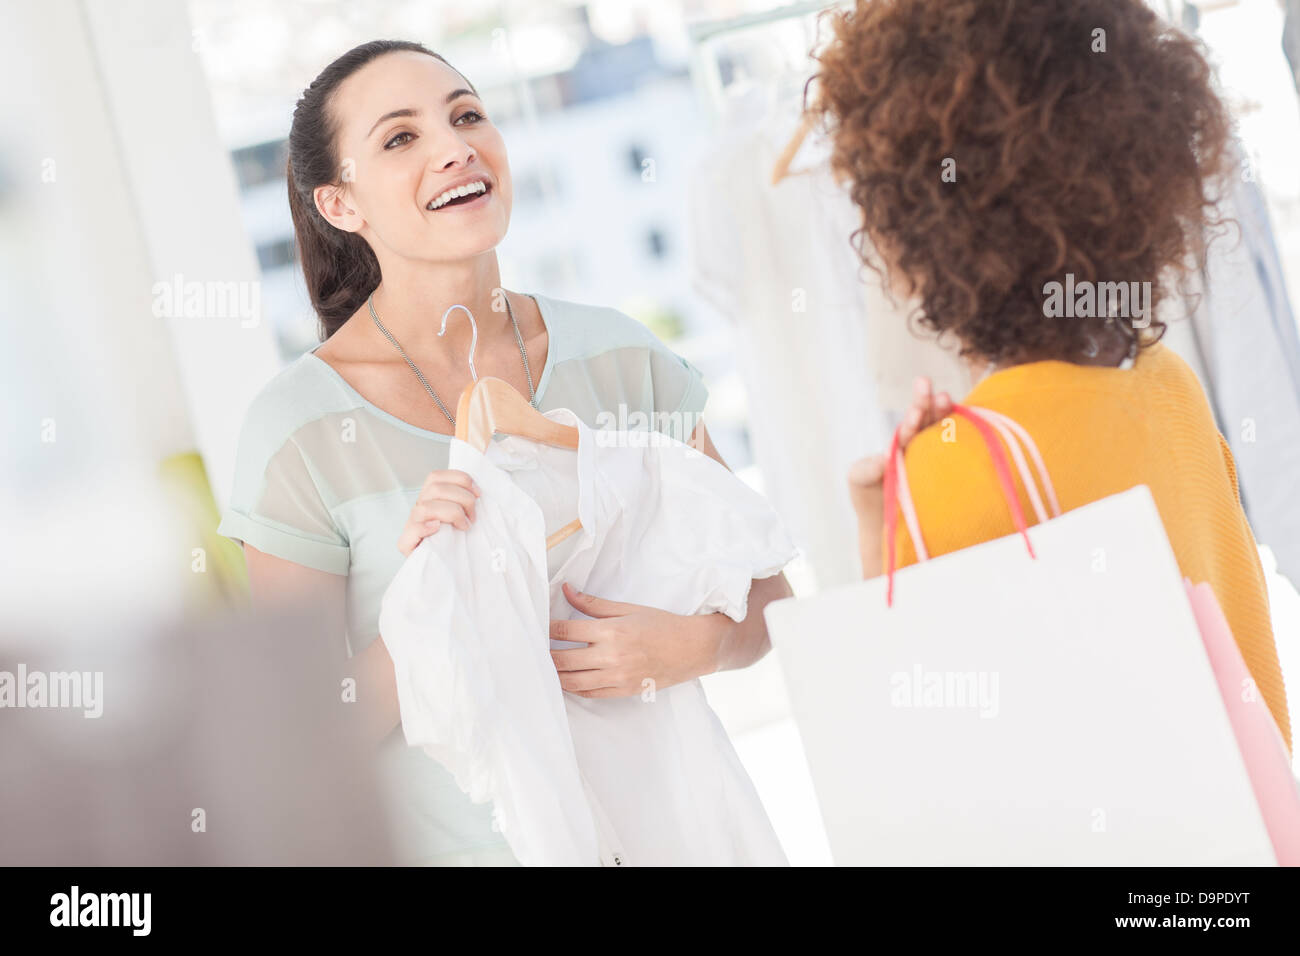 Woman showing her new dress to her friend Stock Photo